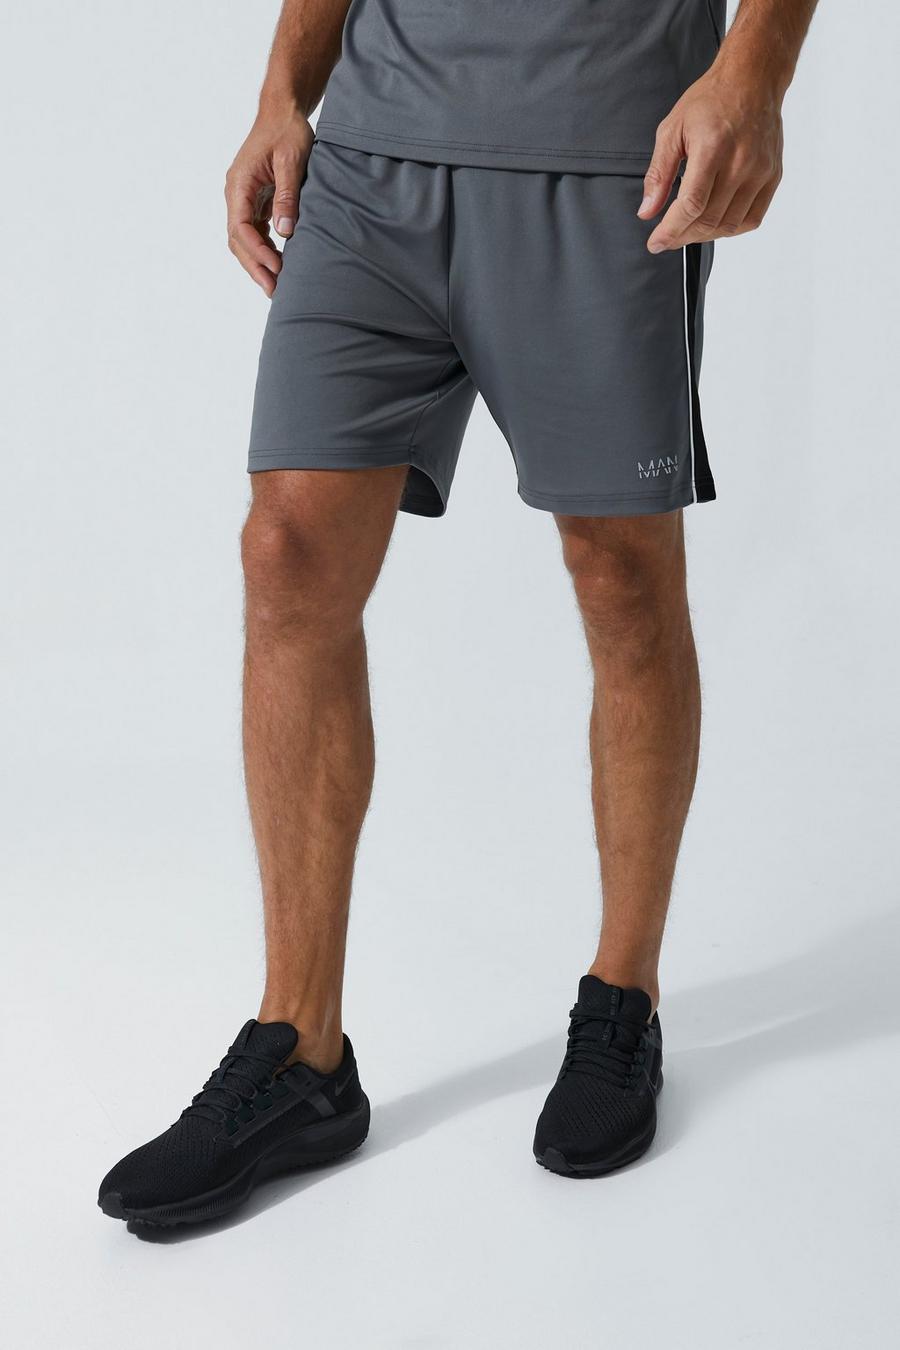 Charcoal gris Tall Man Active Performance Training Shorts image number 1